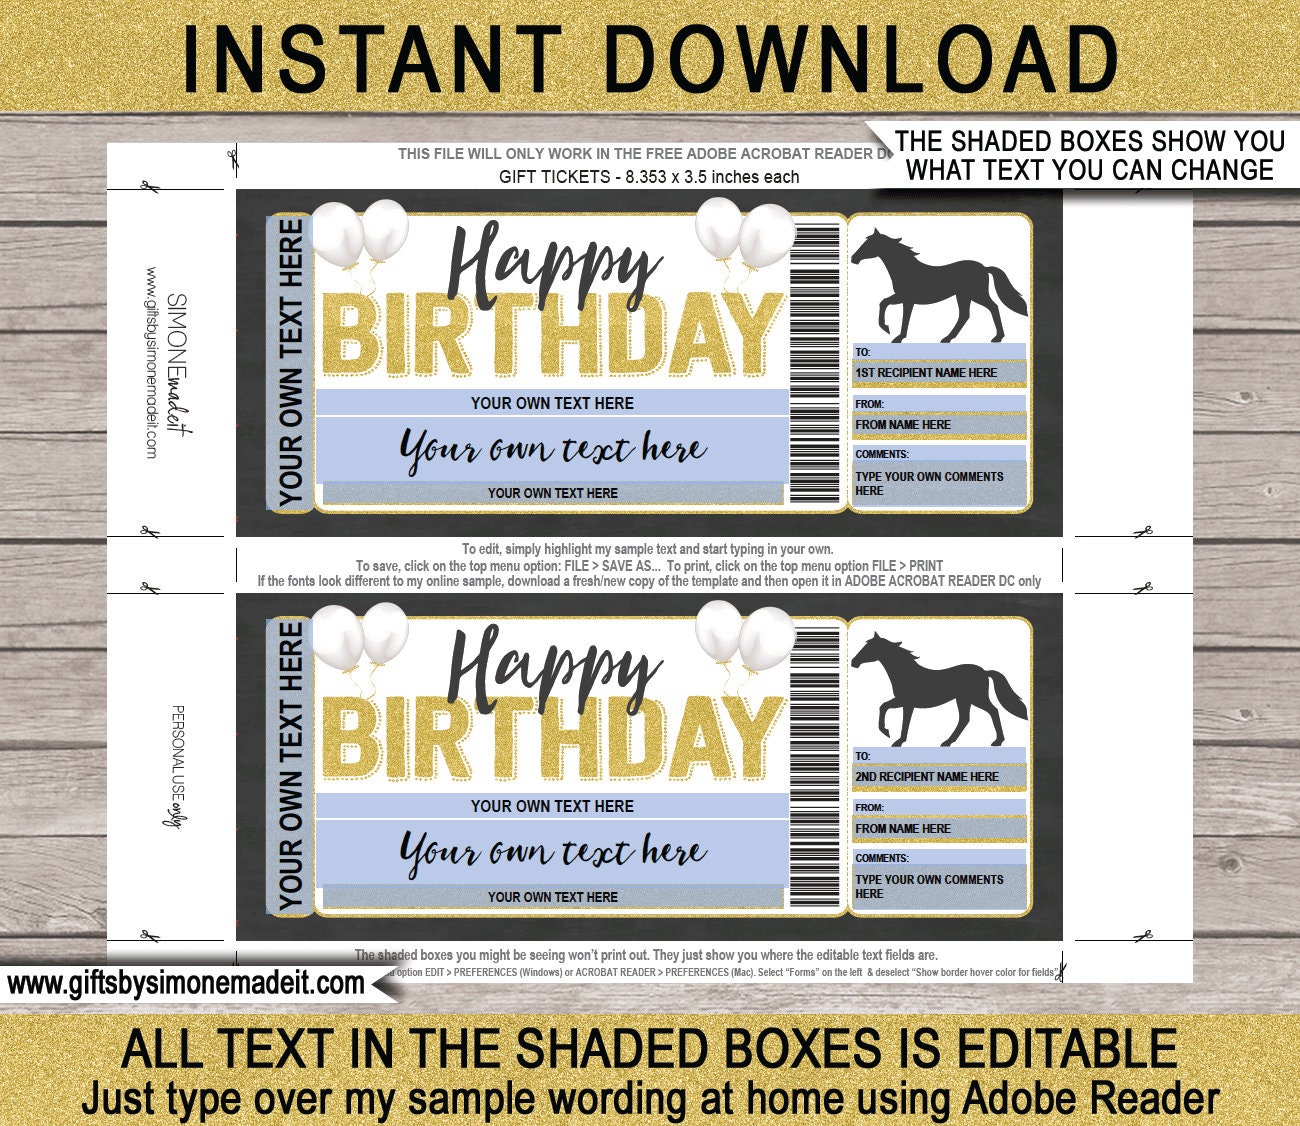 Horse Riding Lessons Gift Voucher Template Certificate Ticket Printable ...